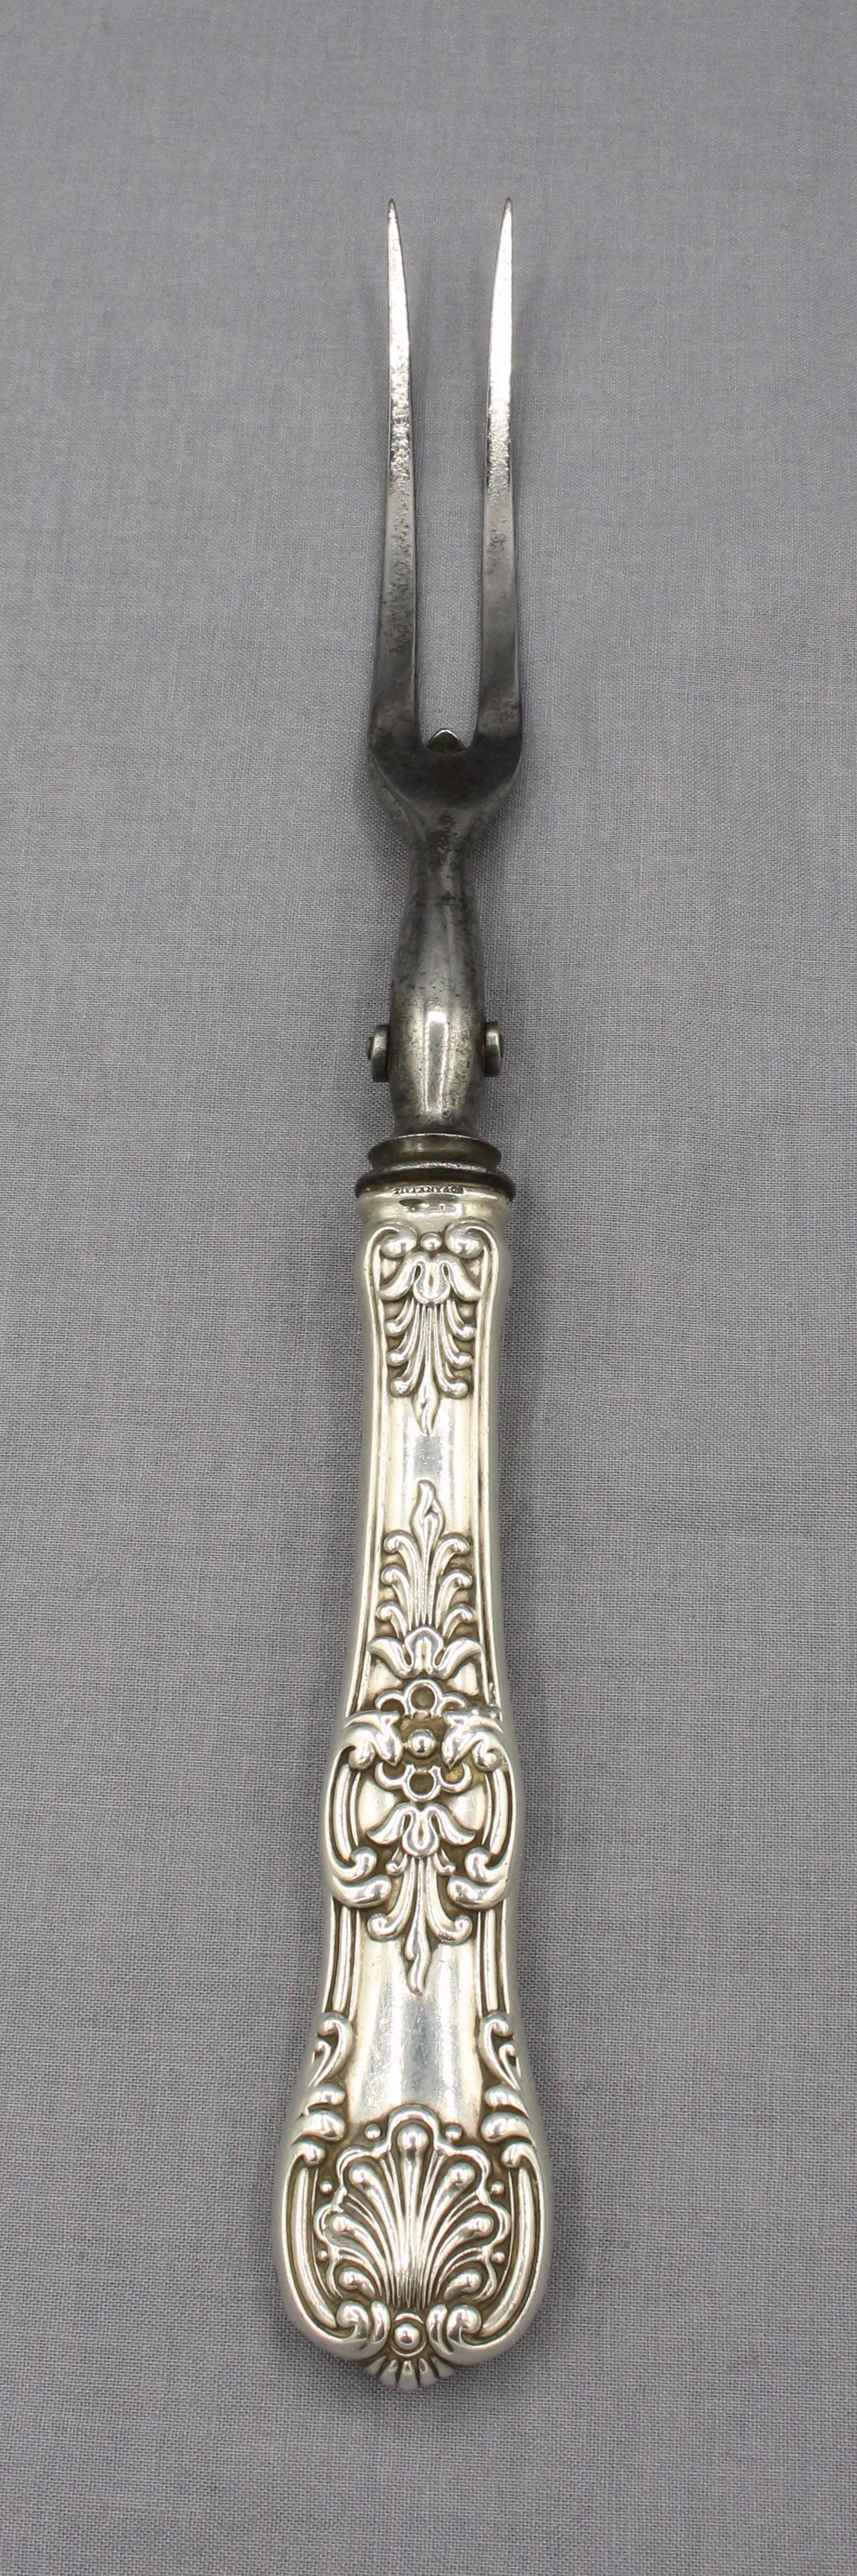 Sterling silver English King pattern carving set by Tiffany & Co., circa 1890s. Roast carving knife & fork. Original steel fittings. Marked on handles 